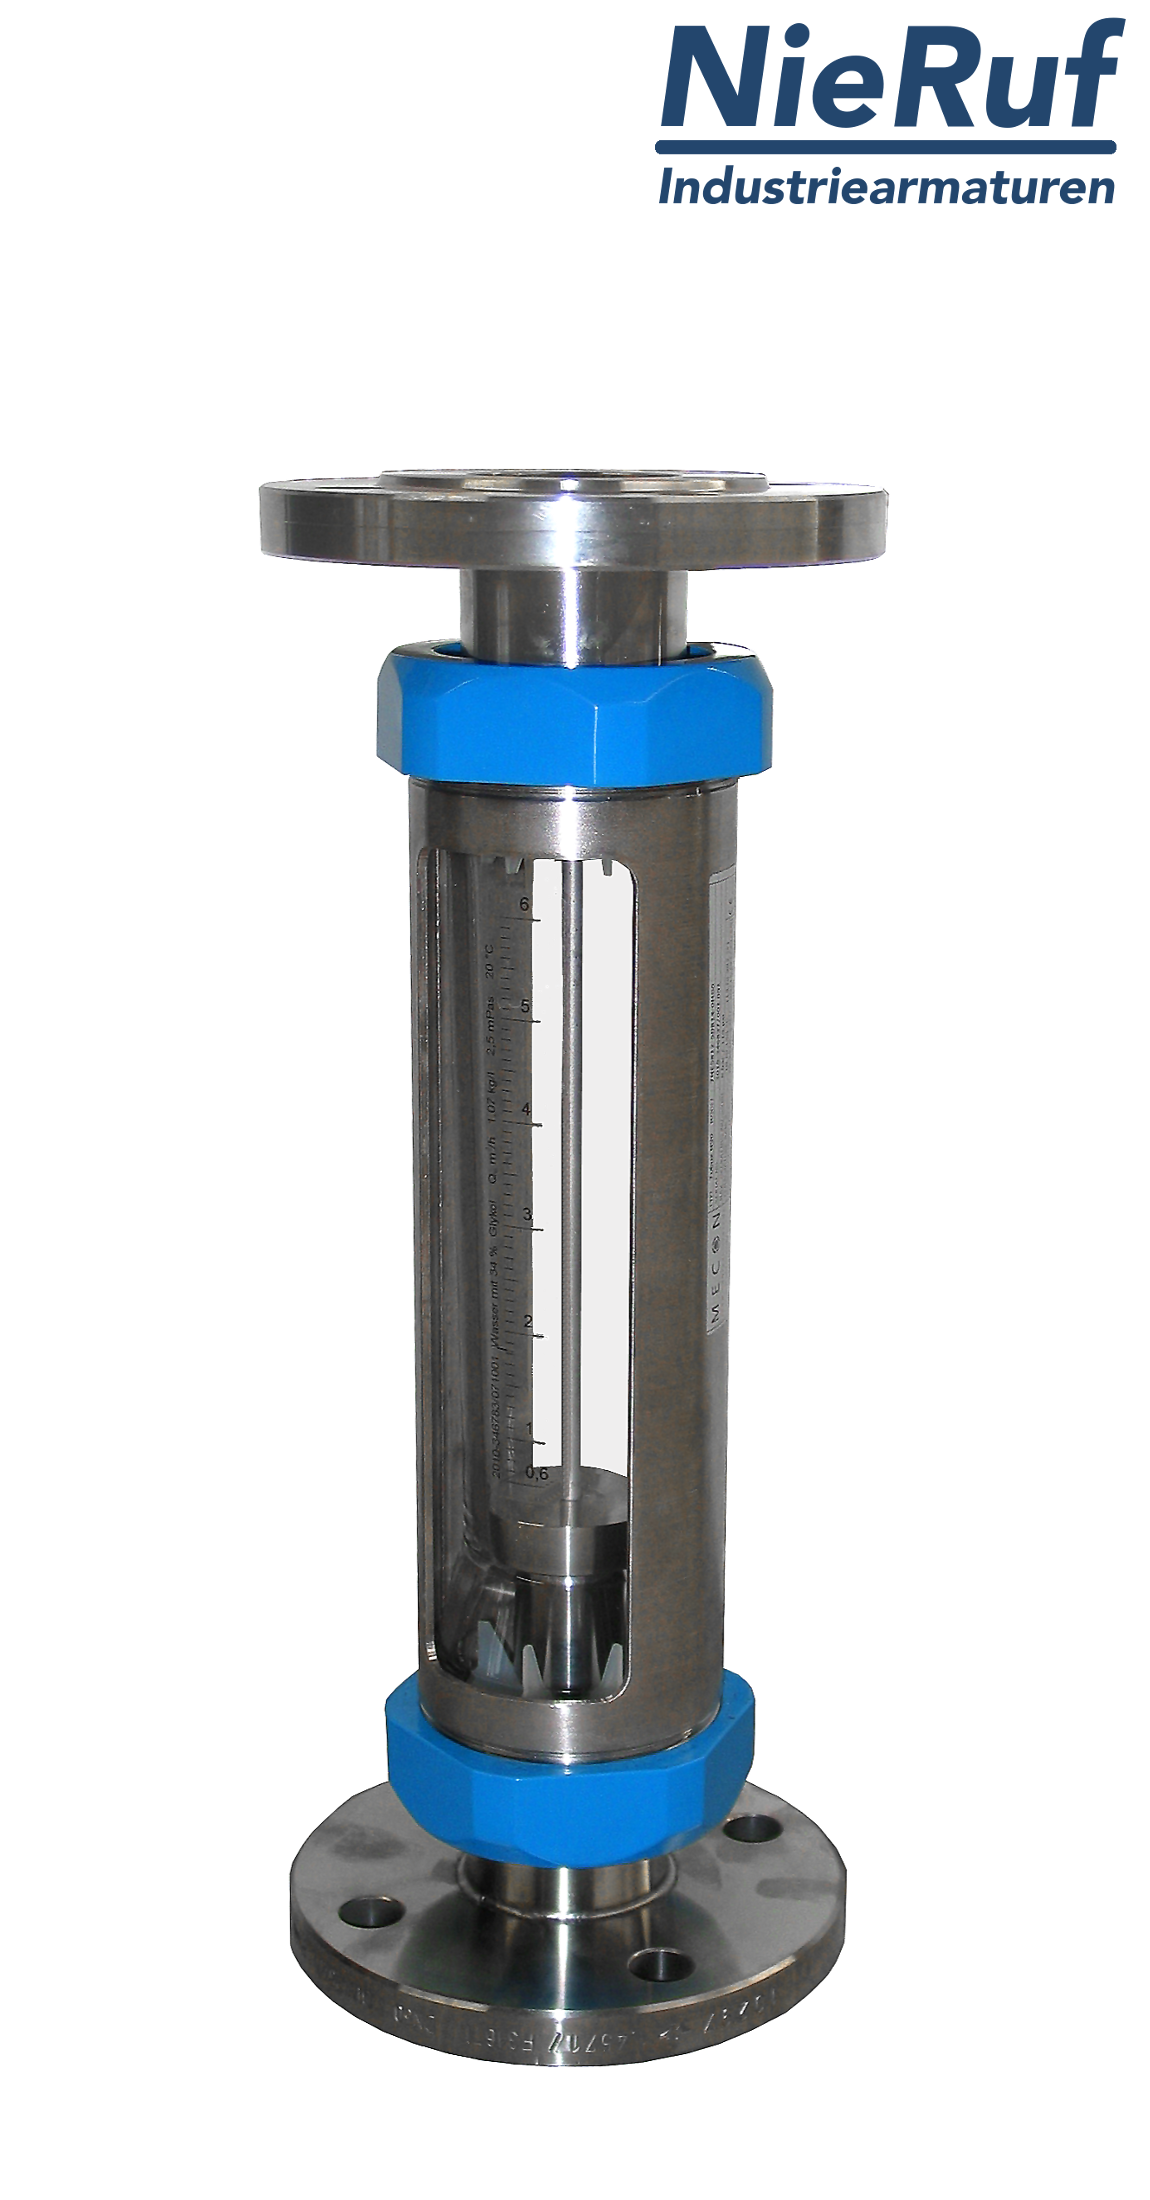 Variable area flowmeter stainless steel + borosilicate flange DN32 80.0 - 800 l/h water FKM